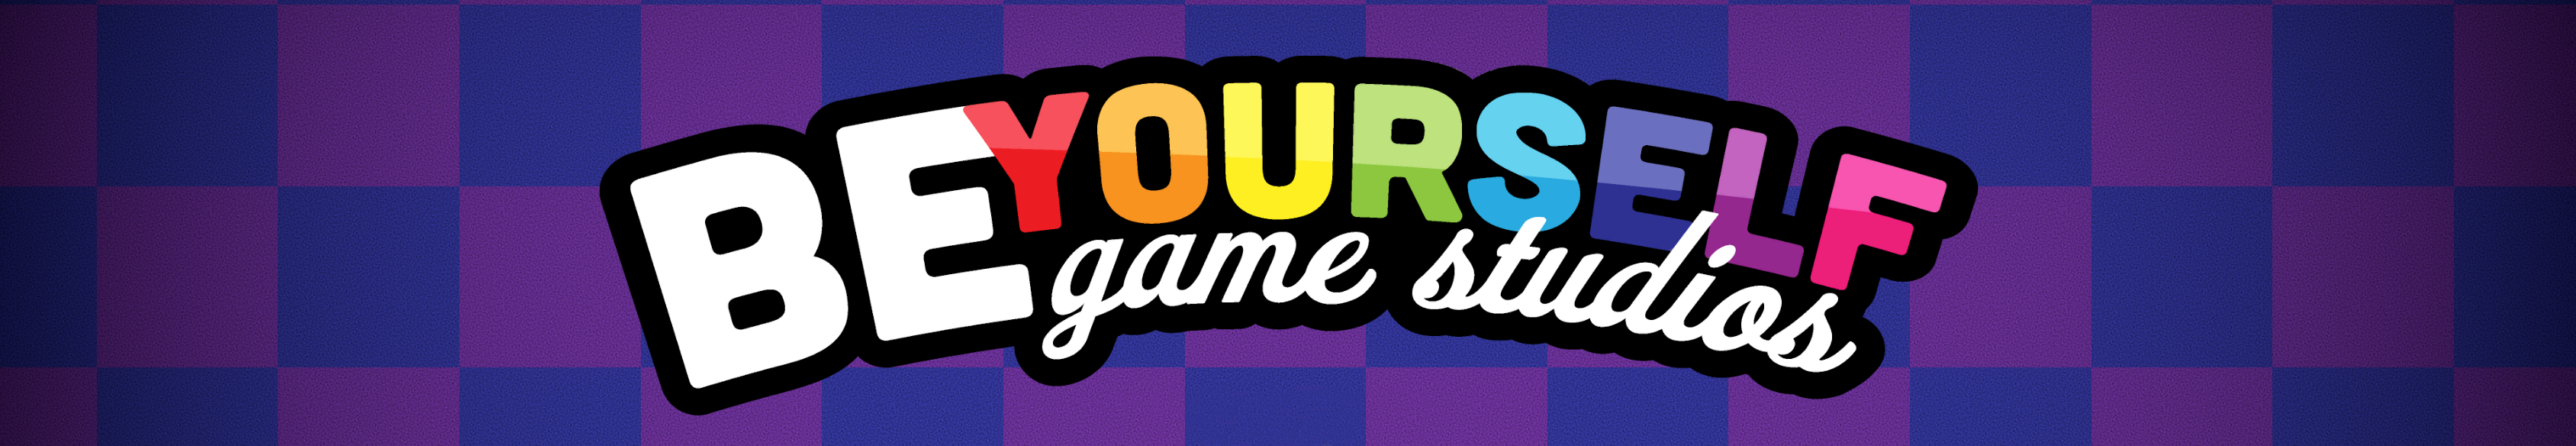 Be Yourself Game Studios (Tommy Eaves Games)